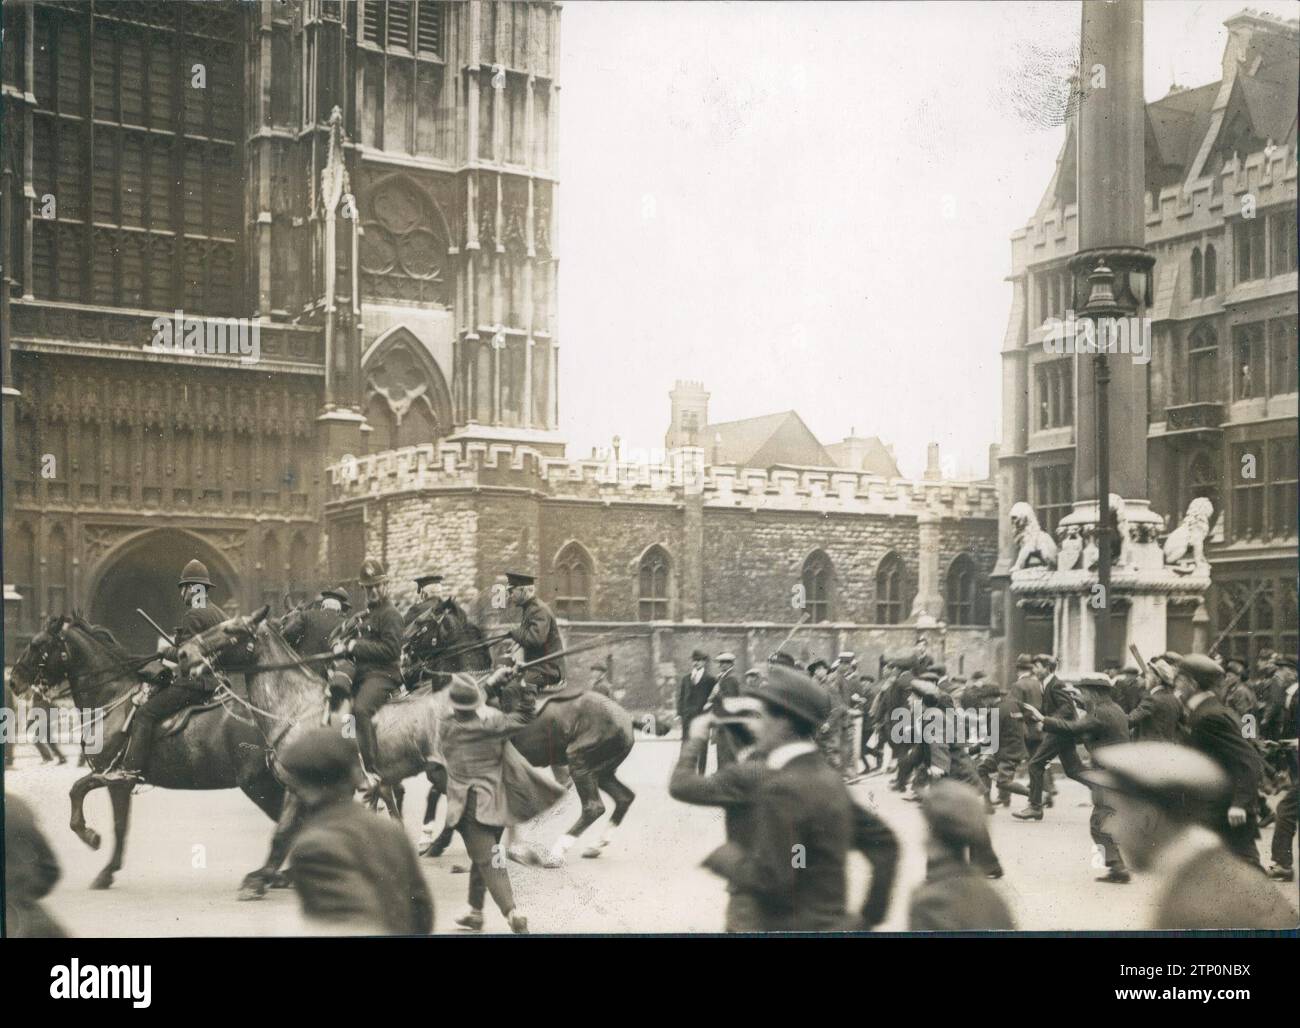 05/31/1919. Riots in London. A group of demobilized soldiers attacking mounted police forces in the vicinity of Westminster Abbey. Credit: Album / Archivo ABC / Charles Trampus Stock Photo